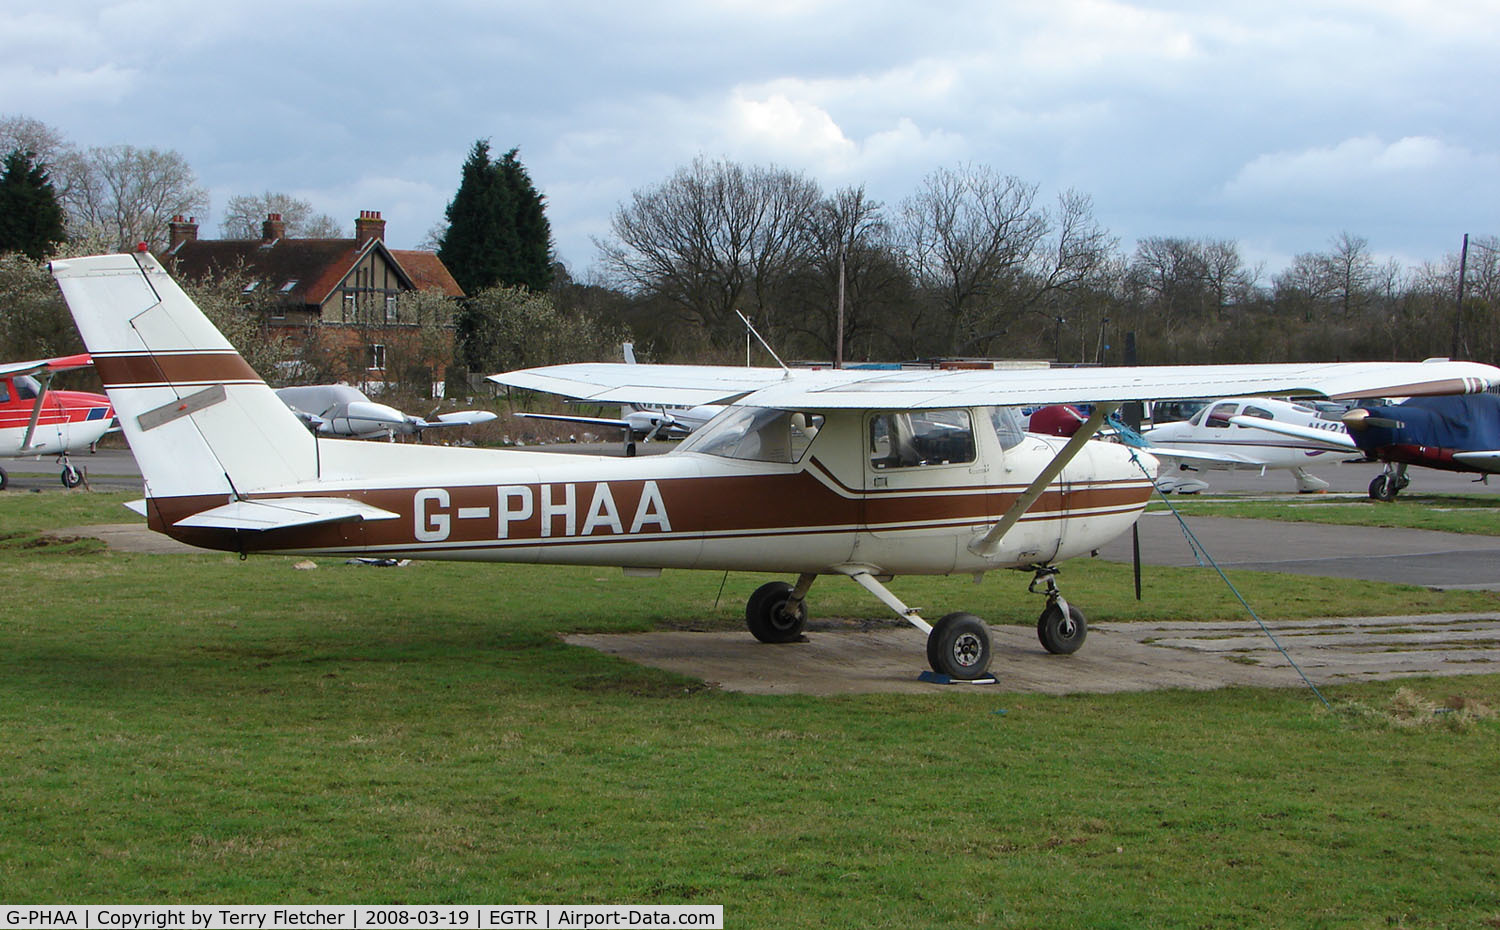 G-PHAA, 1974 Reims F150M C/N 1159, Part of the busy GA scene at Elstree Airfield in the northern suburbs of London